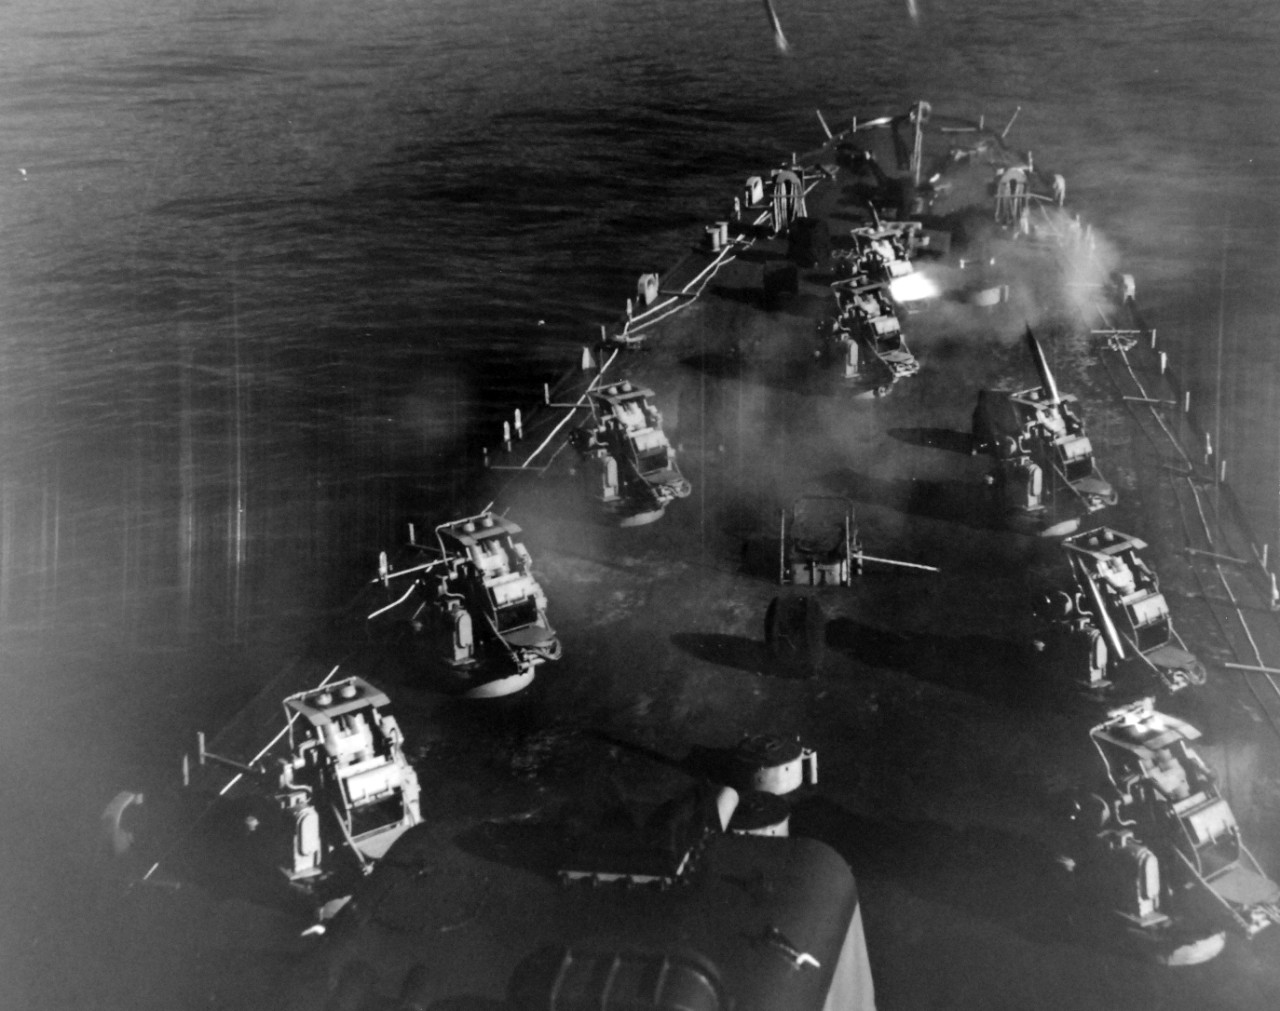 80-G-689755:  USS Carronade (IFS-1), 1955-59.  Firing rockets from deck.   Carronade was an Inshore Fire Support Ship, built to provide gunfire support to amphibious landings or operations close to shore. Official U.S. Navy Photograph, now in the collections of the National Archives.  (2017/11/01).  Photograph is extremely curved.  